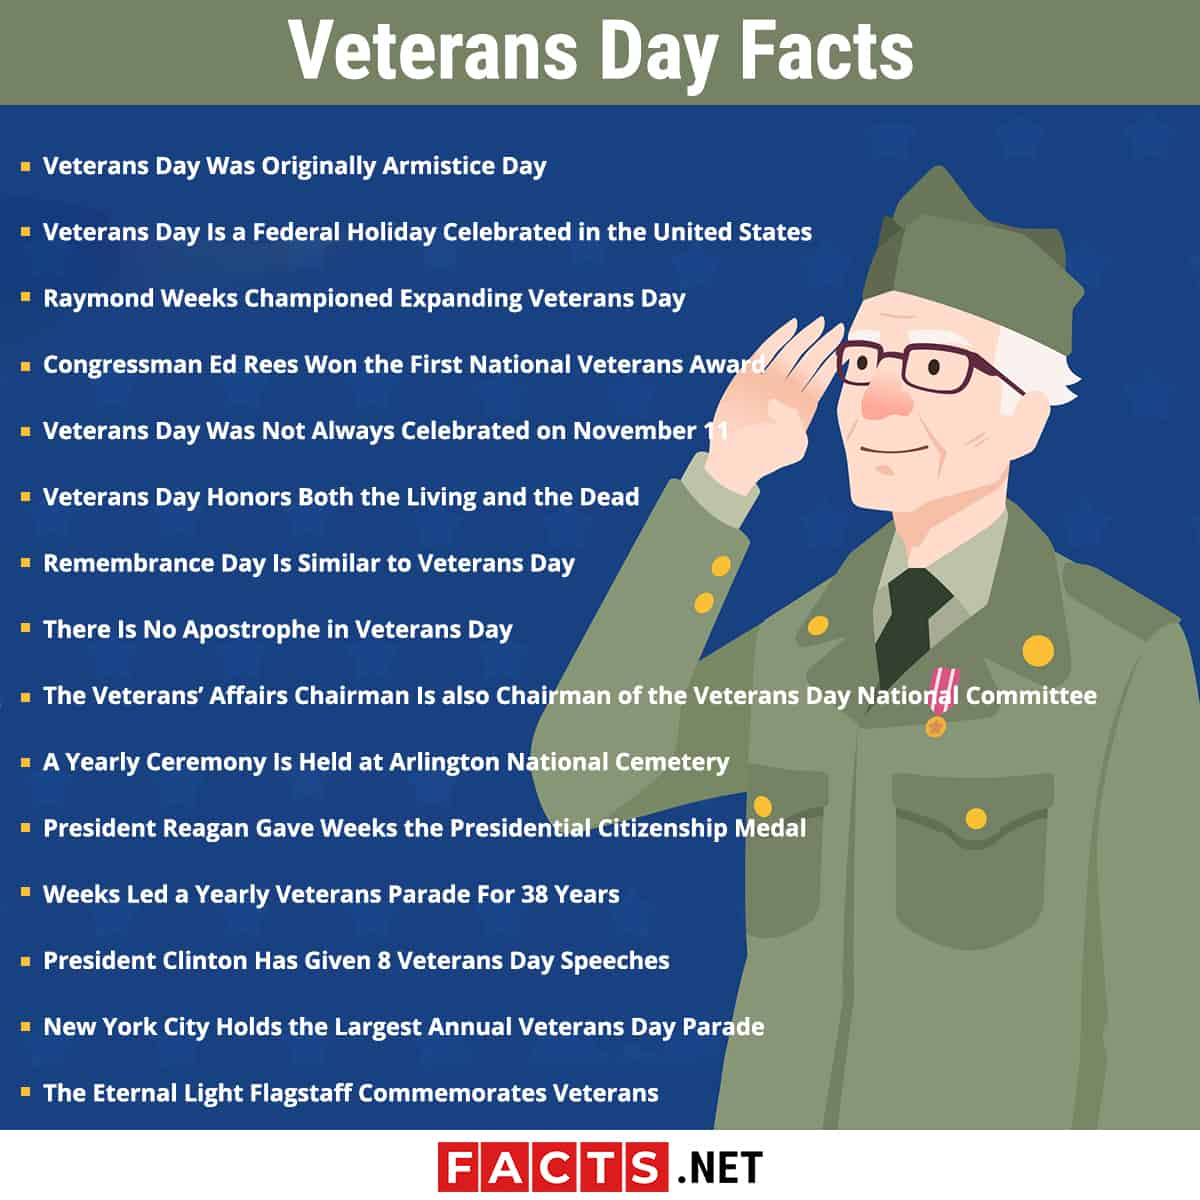 15-veterans-day-facts-history-culture-politics-more-facts